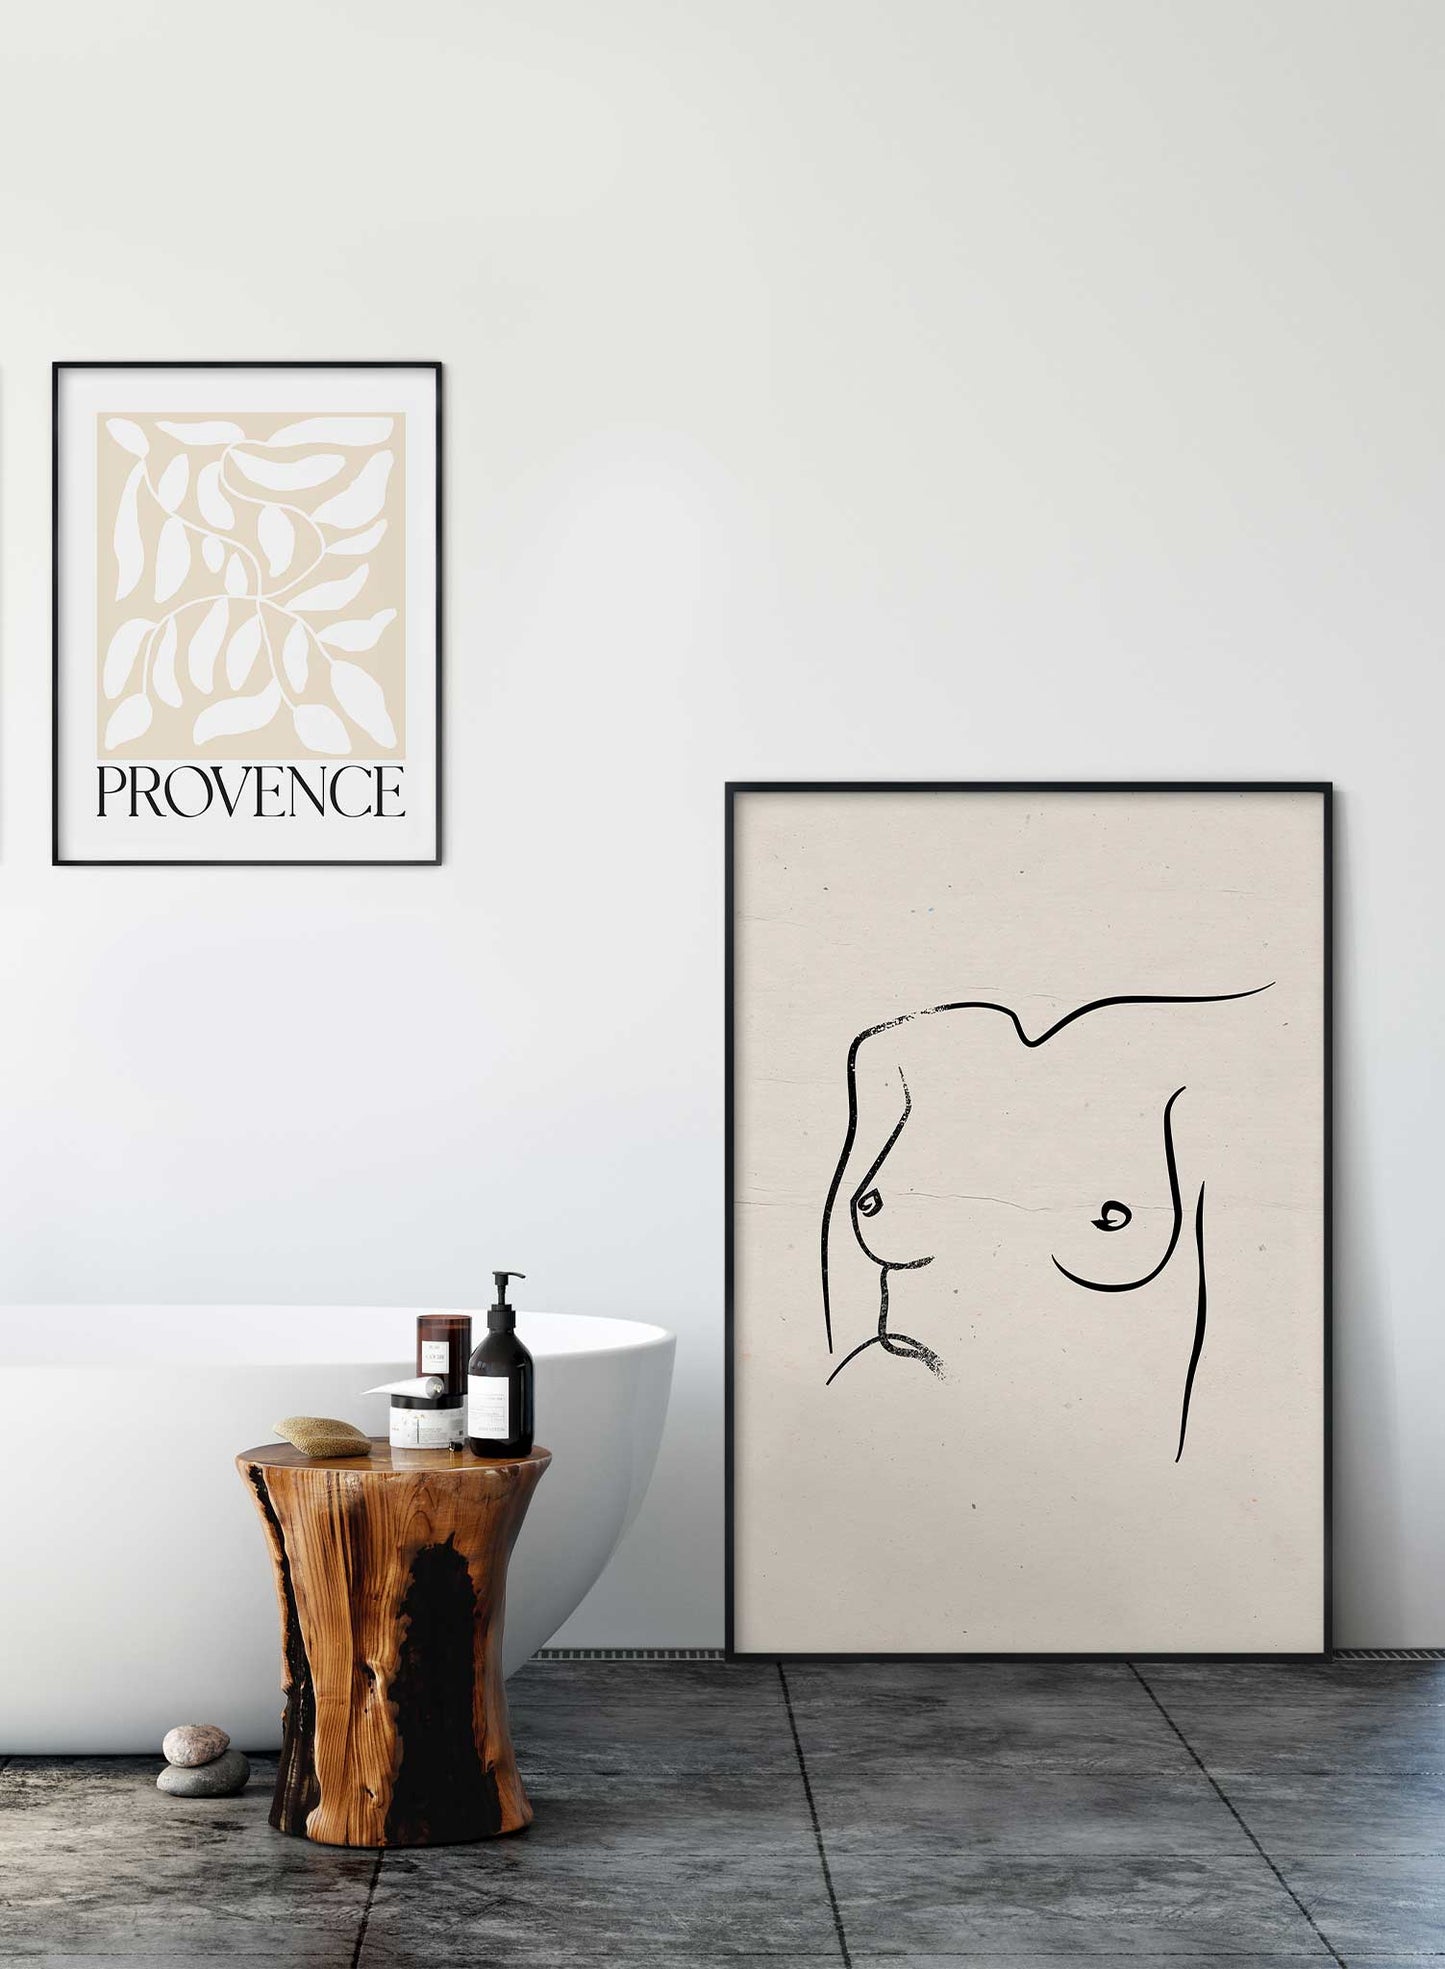 Birthday Suit is a line art illustration of a glamorous woman's chest by Opposite Wall.